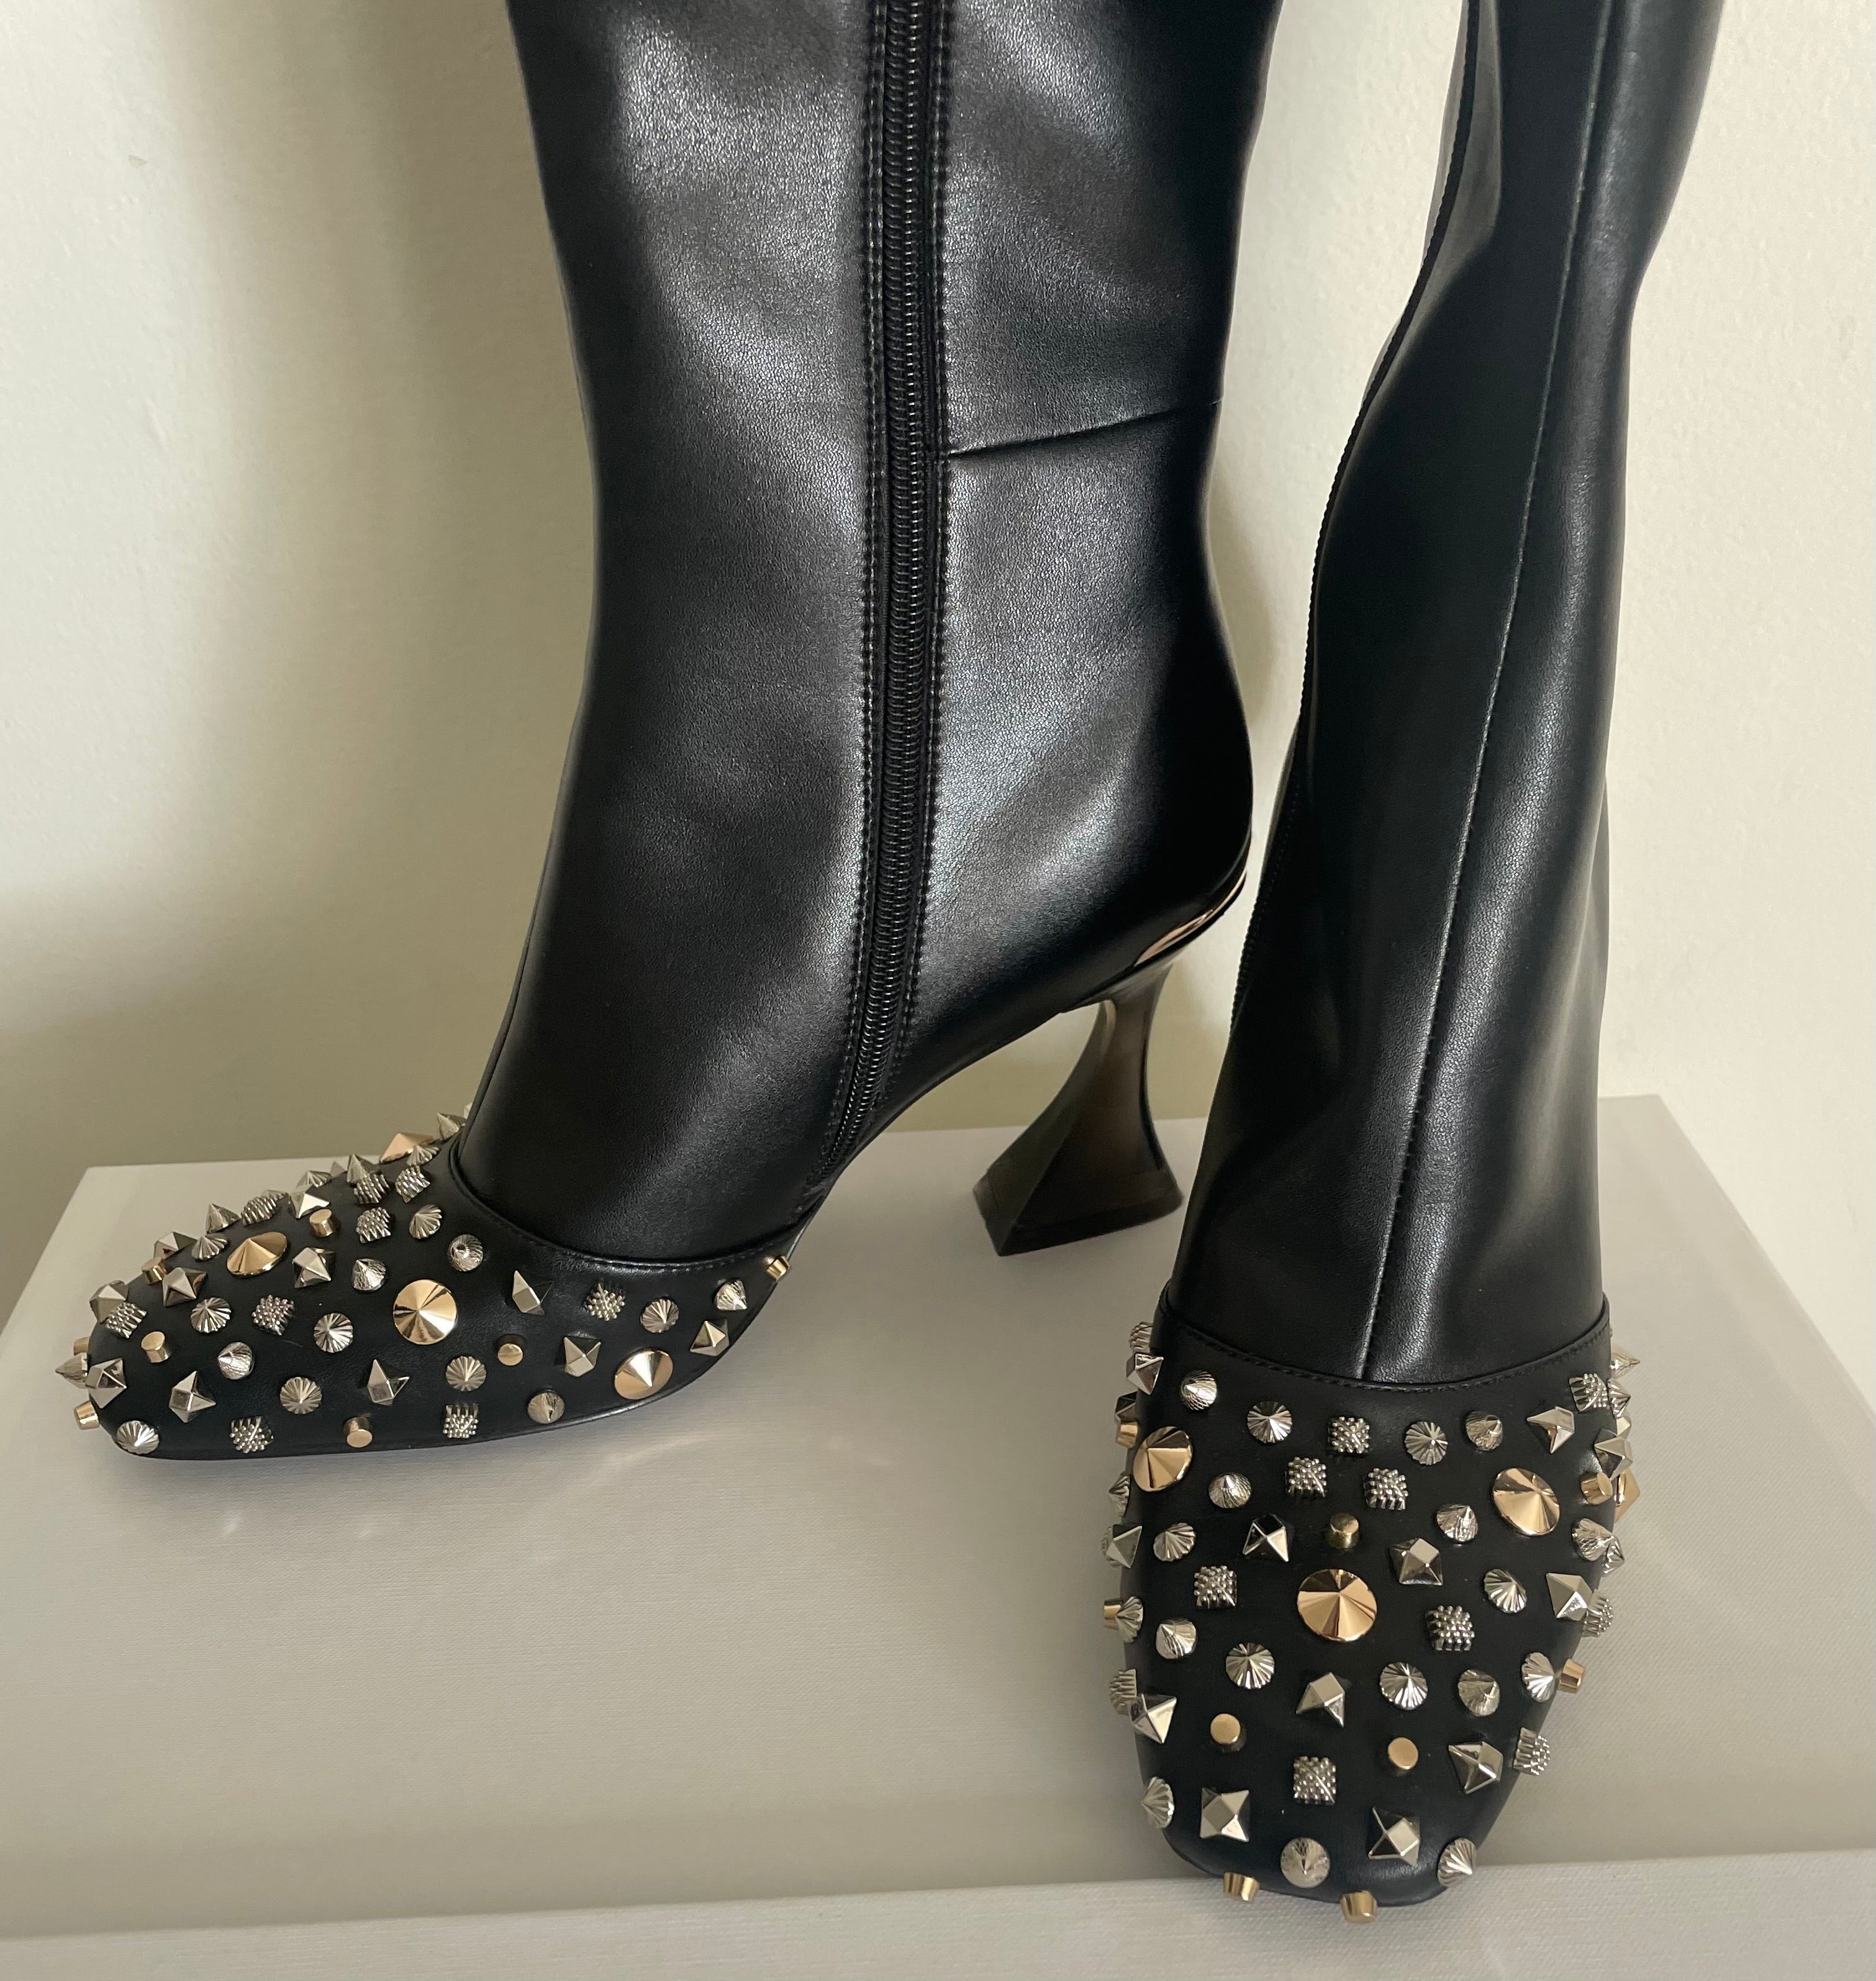 Rockstud Squared Toe Over-The-Knee High Heel Boots